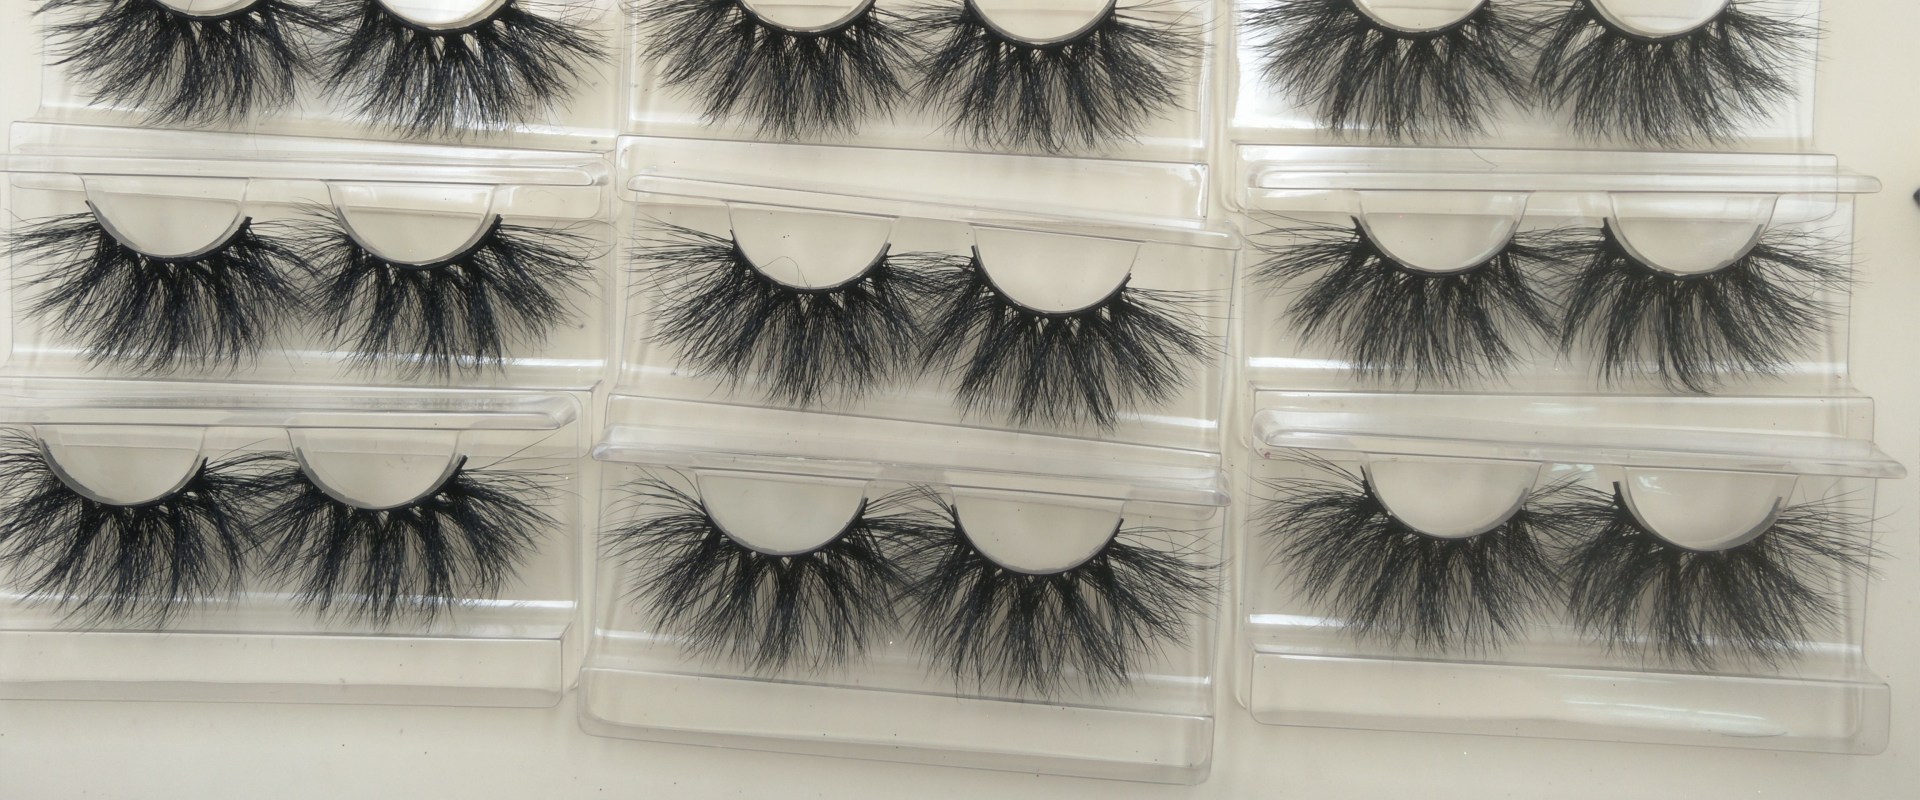 How to Find the Best Eyelash Vendor for Your Business